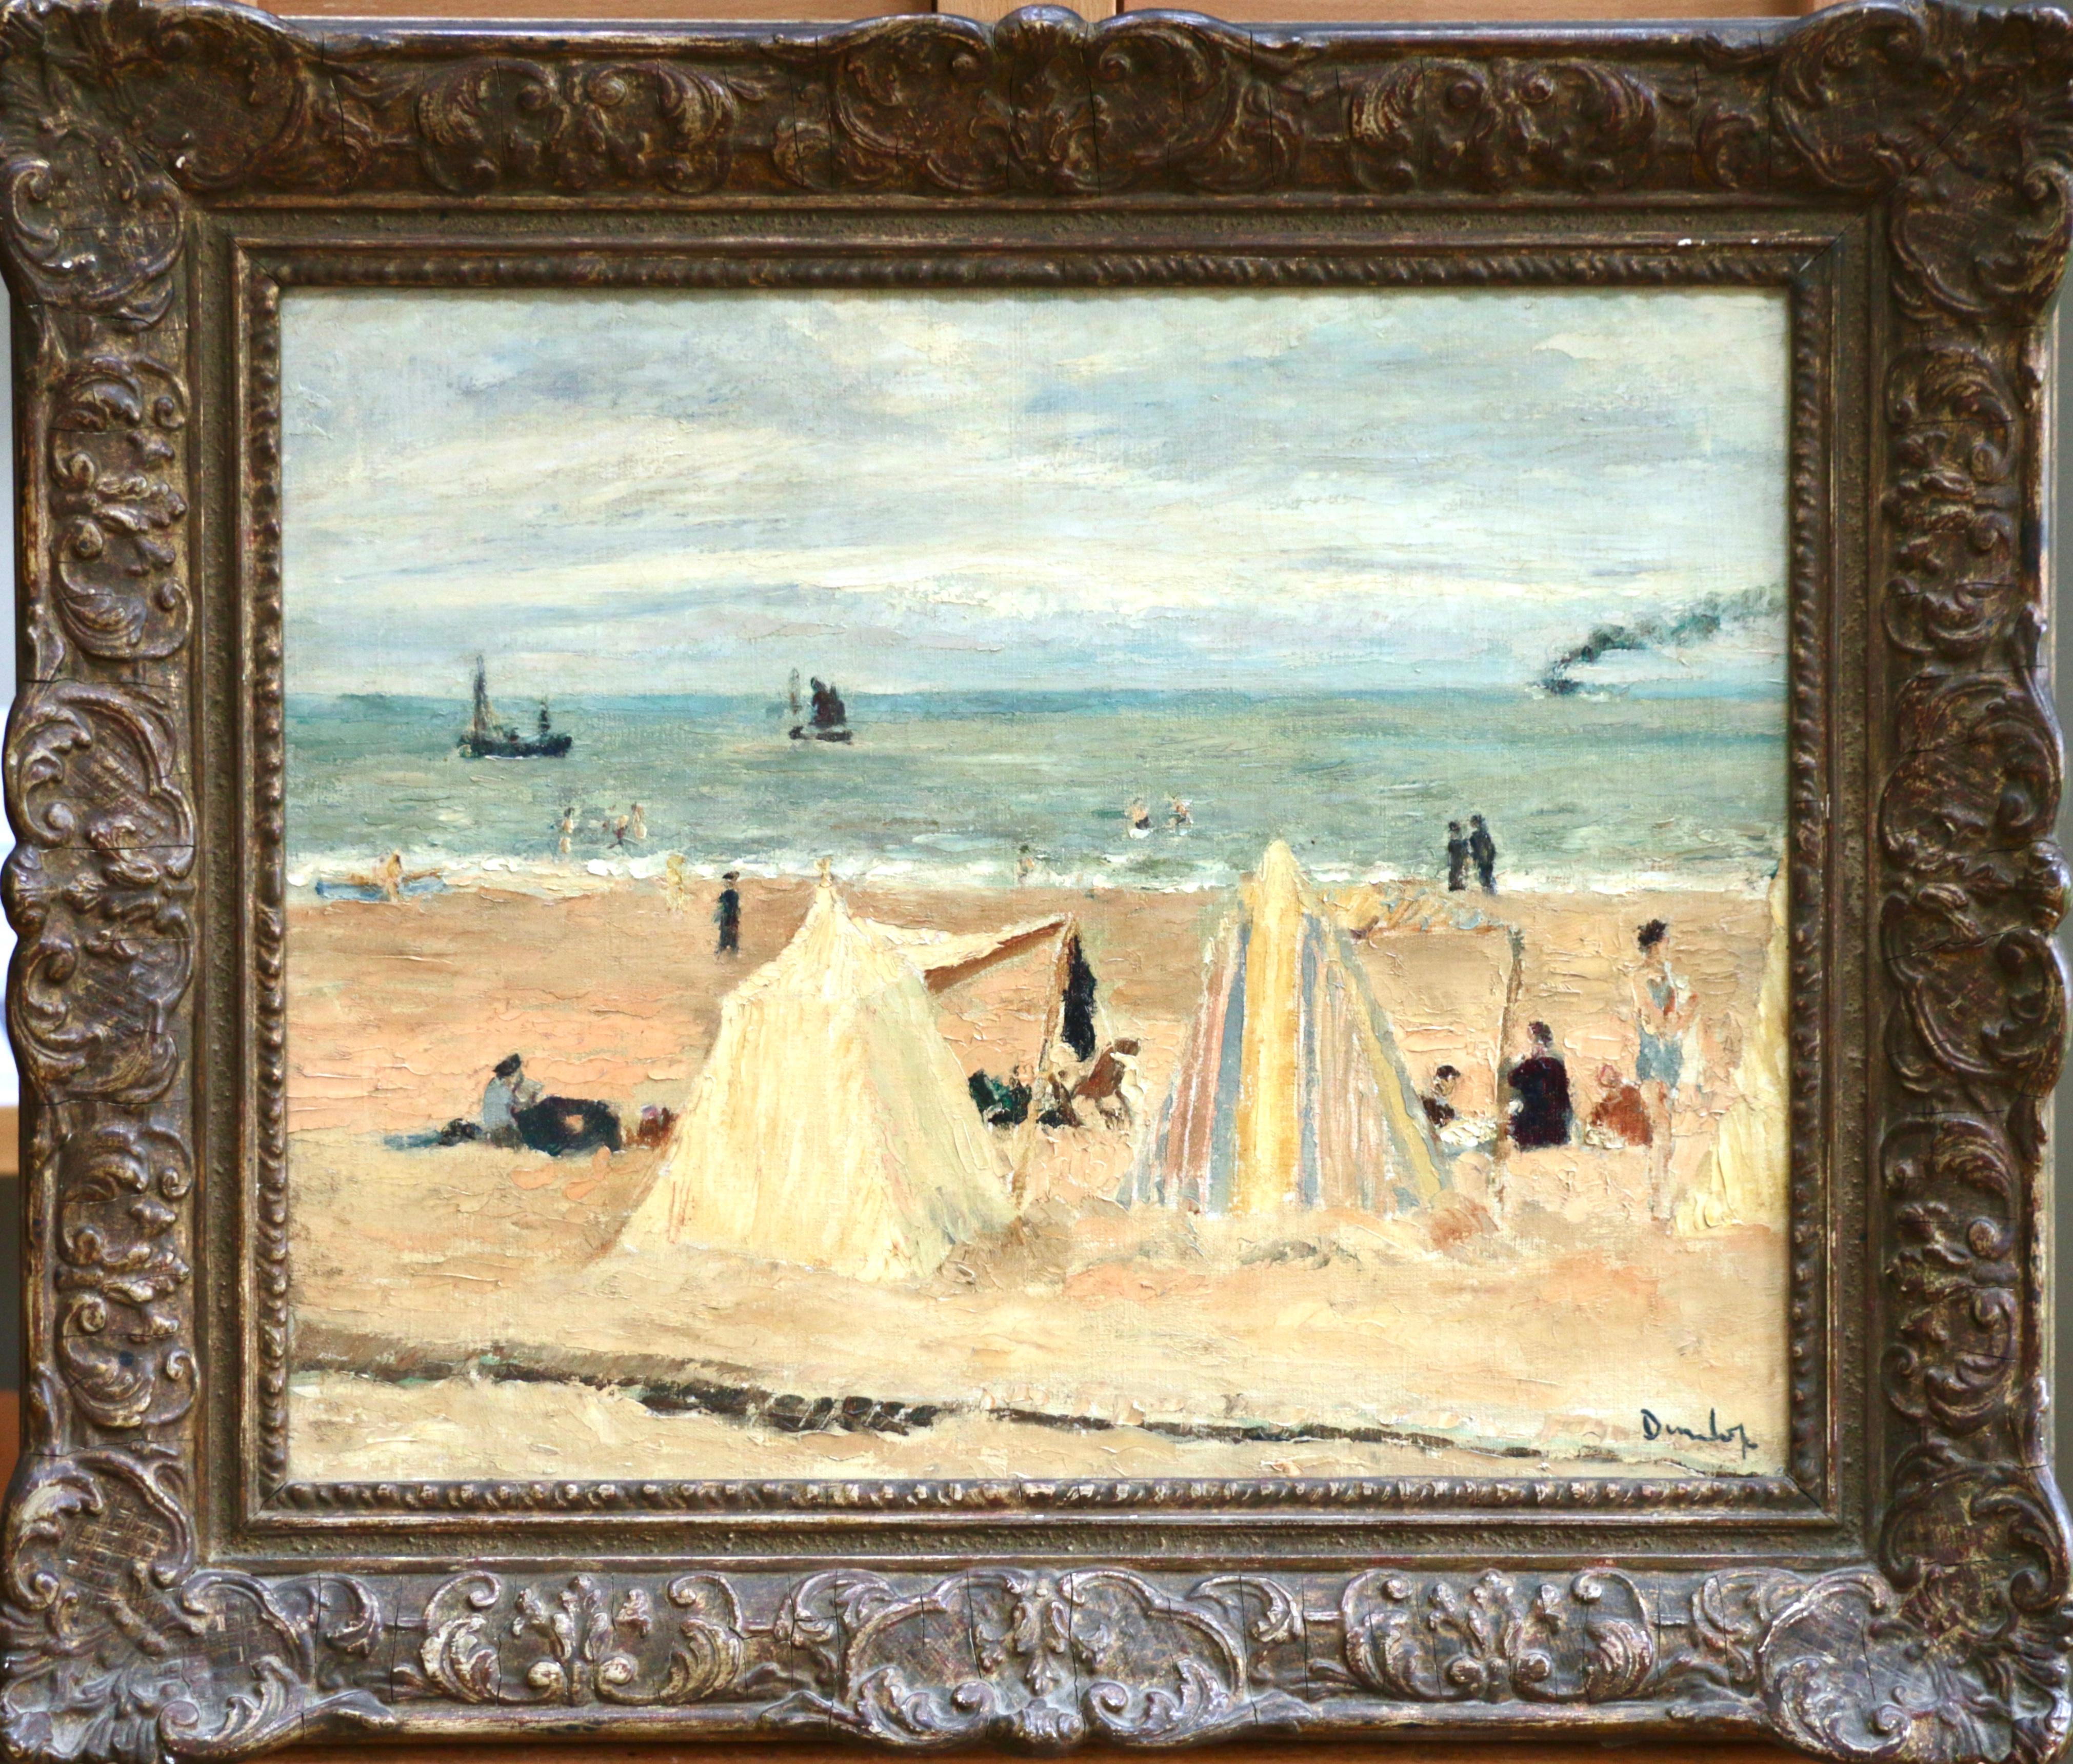 Ronald Ossory Dunlop Landscape Painting - Calais Beach - Early 20th Century Oil, Figures in Coastal Landscape by R Dunlop